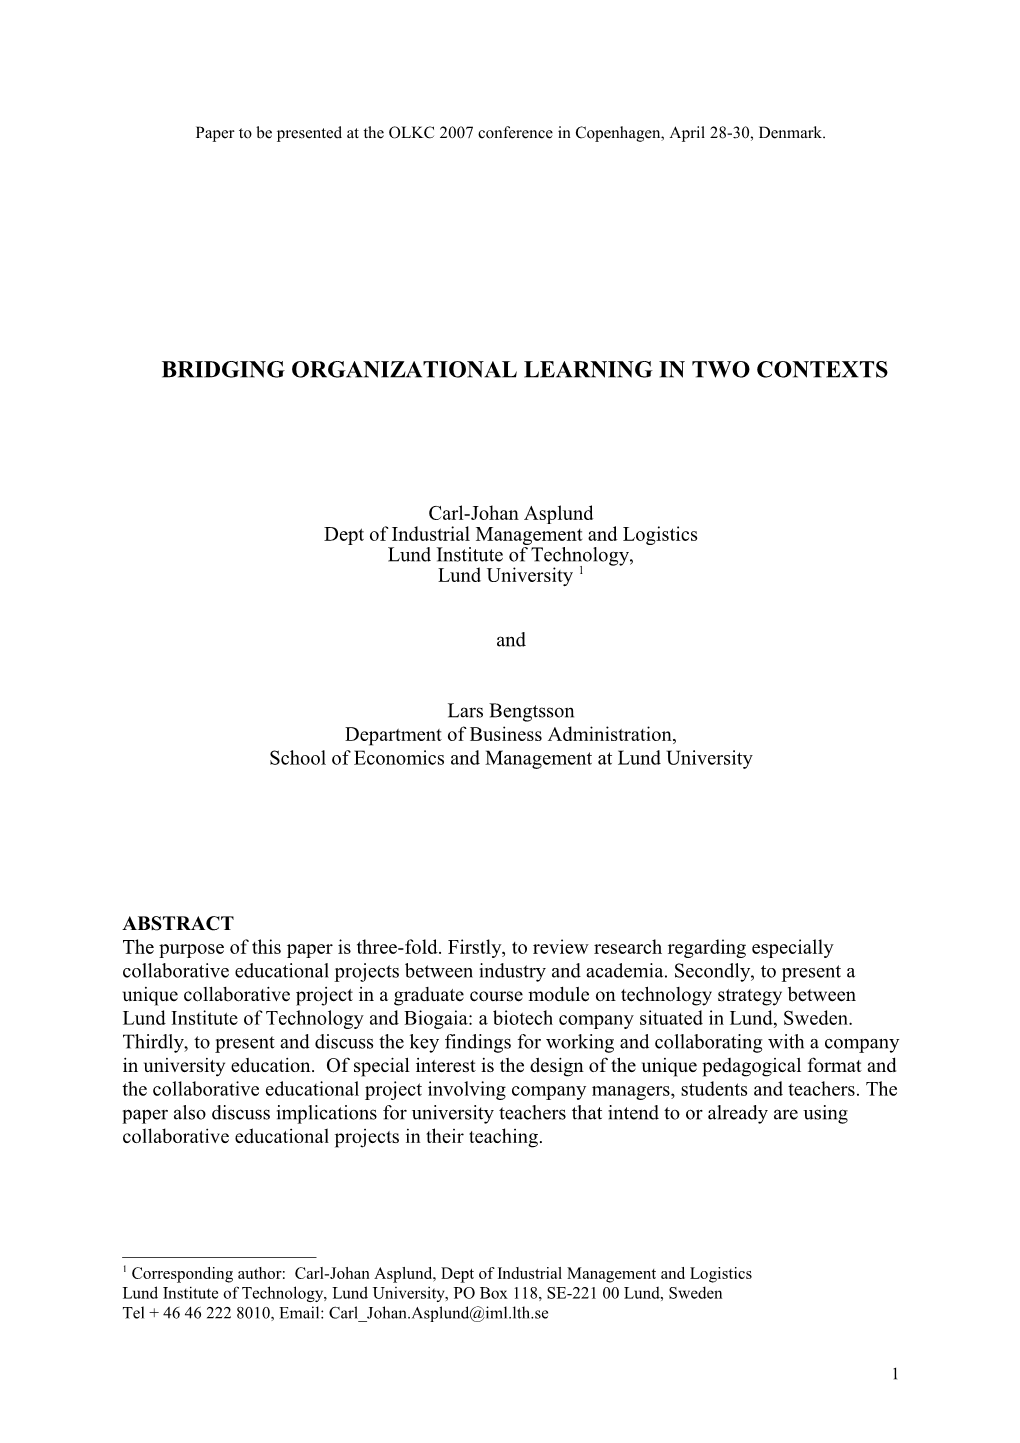 Final Paper for the OKLC 2008 International Conference on Organizational Learning, Knowledge